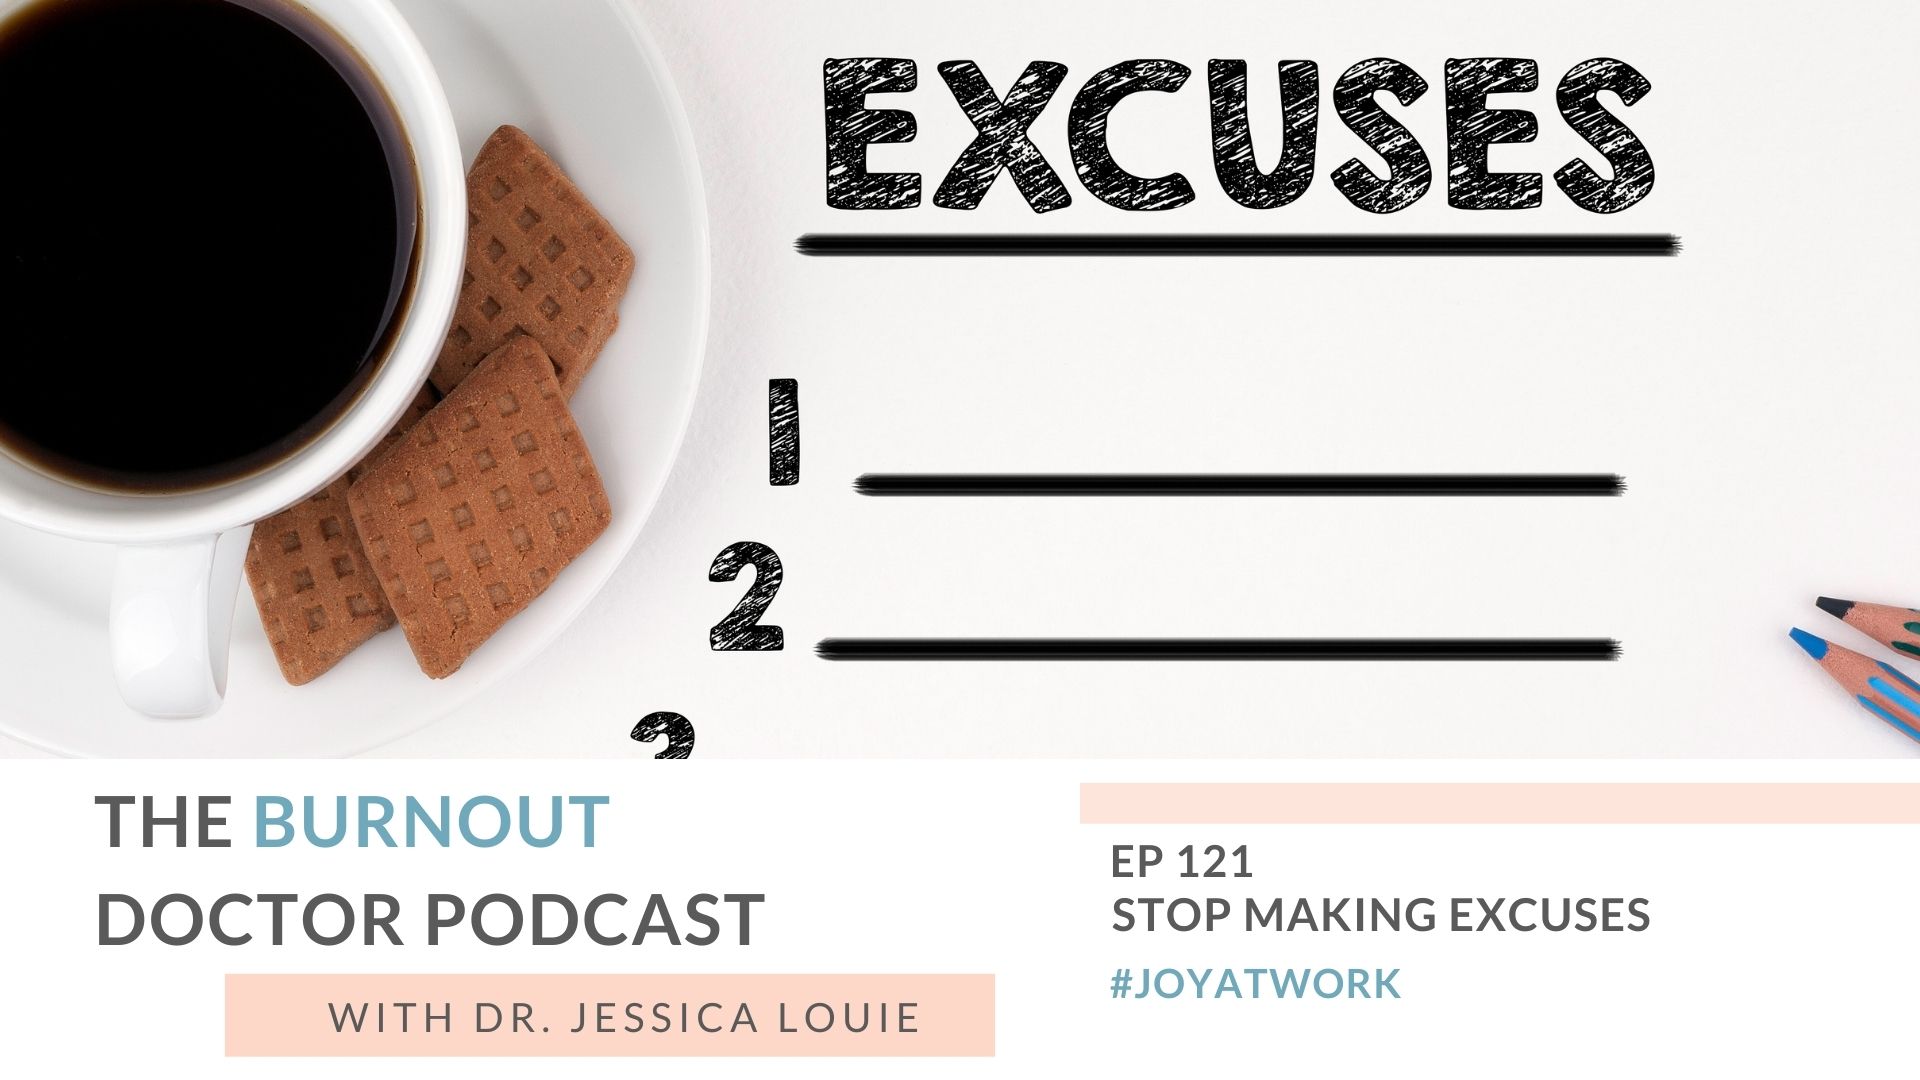 Stop making excuses, how to stop making excuses about burnout, how to stop procrastinating in pharmacy, pharmacist burnout help, keynote speaker on burnout, simplifying, KonMari Method. The Burnout Doctor Podcast with Dr. Jessica Louie